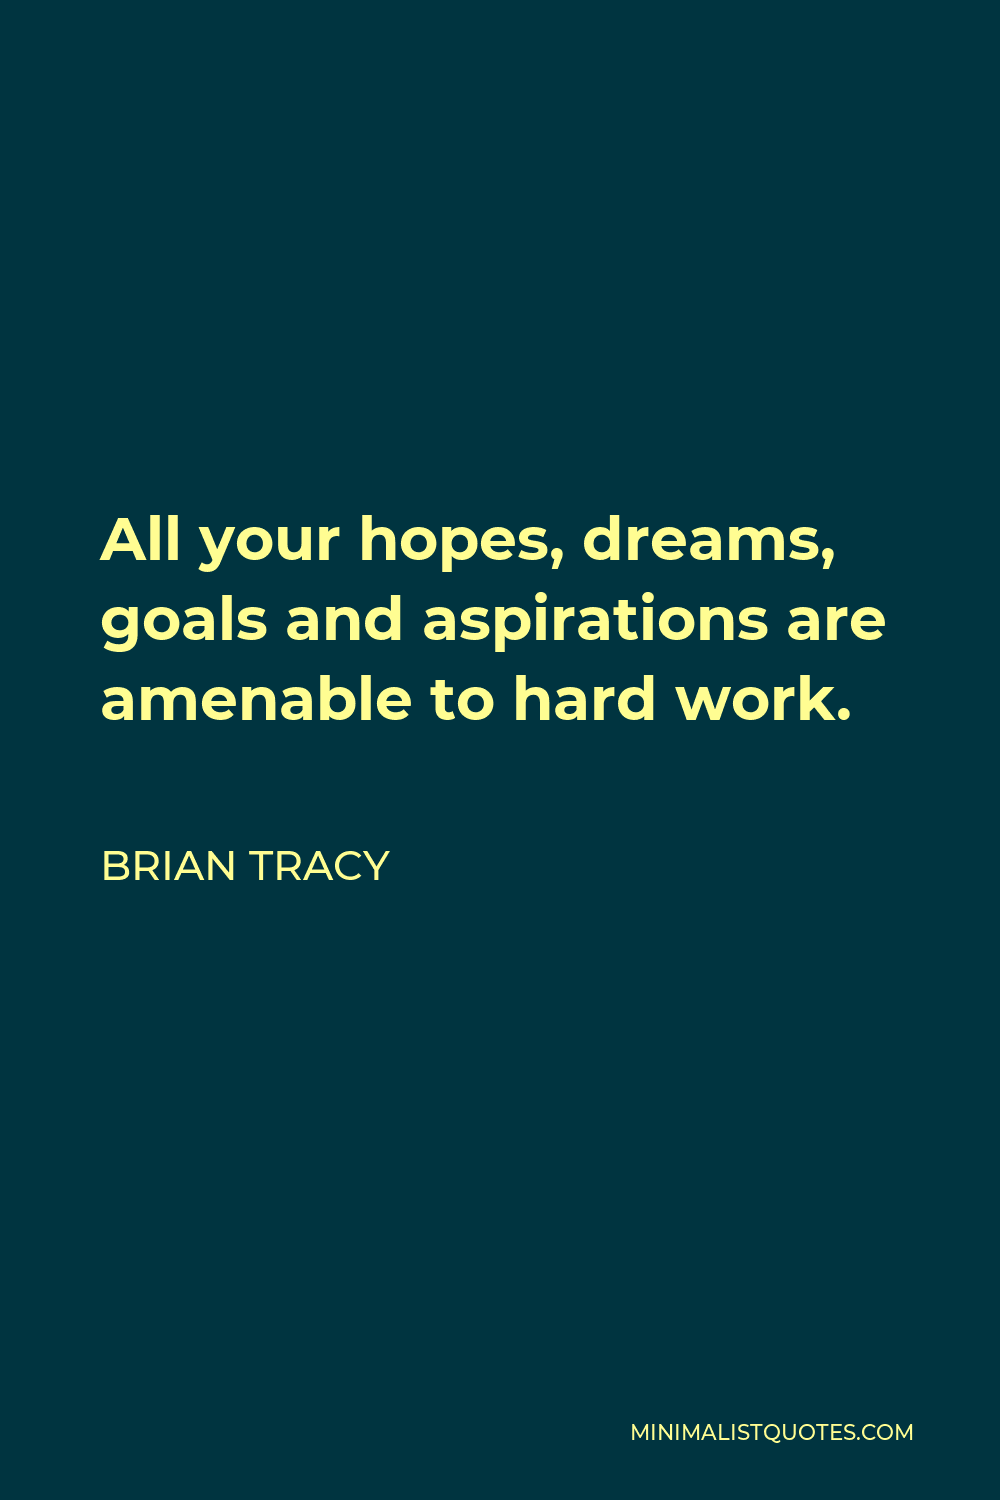 Brian Tracy Quote - All your hopes, dreams, goals and aspirations are amenable to hard work.